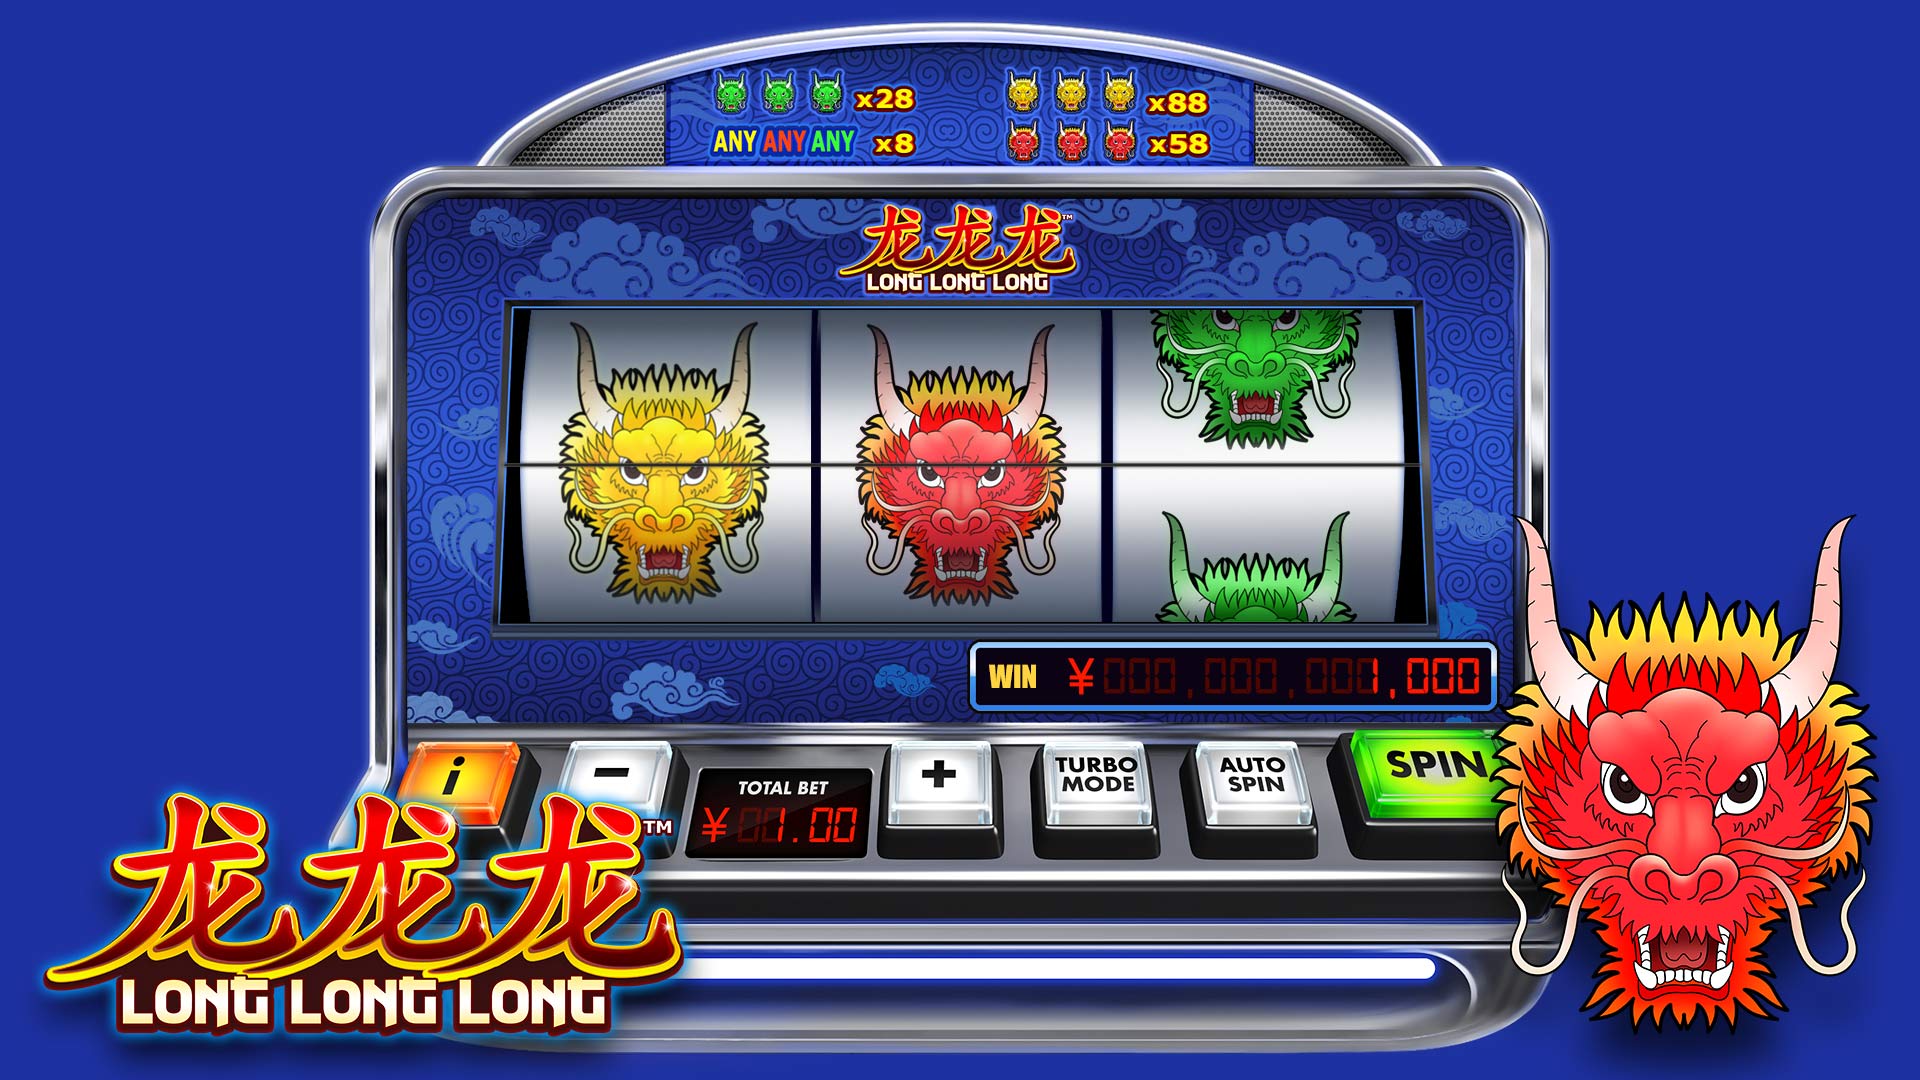 Long Long Long is a Slots Game Provided by the Vendor Partner Skywind Group - GamingSoft